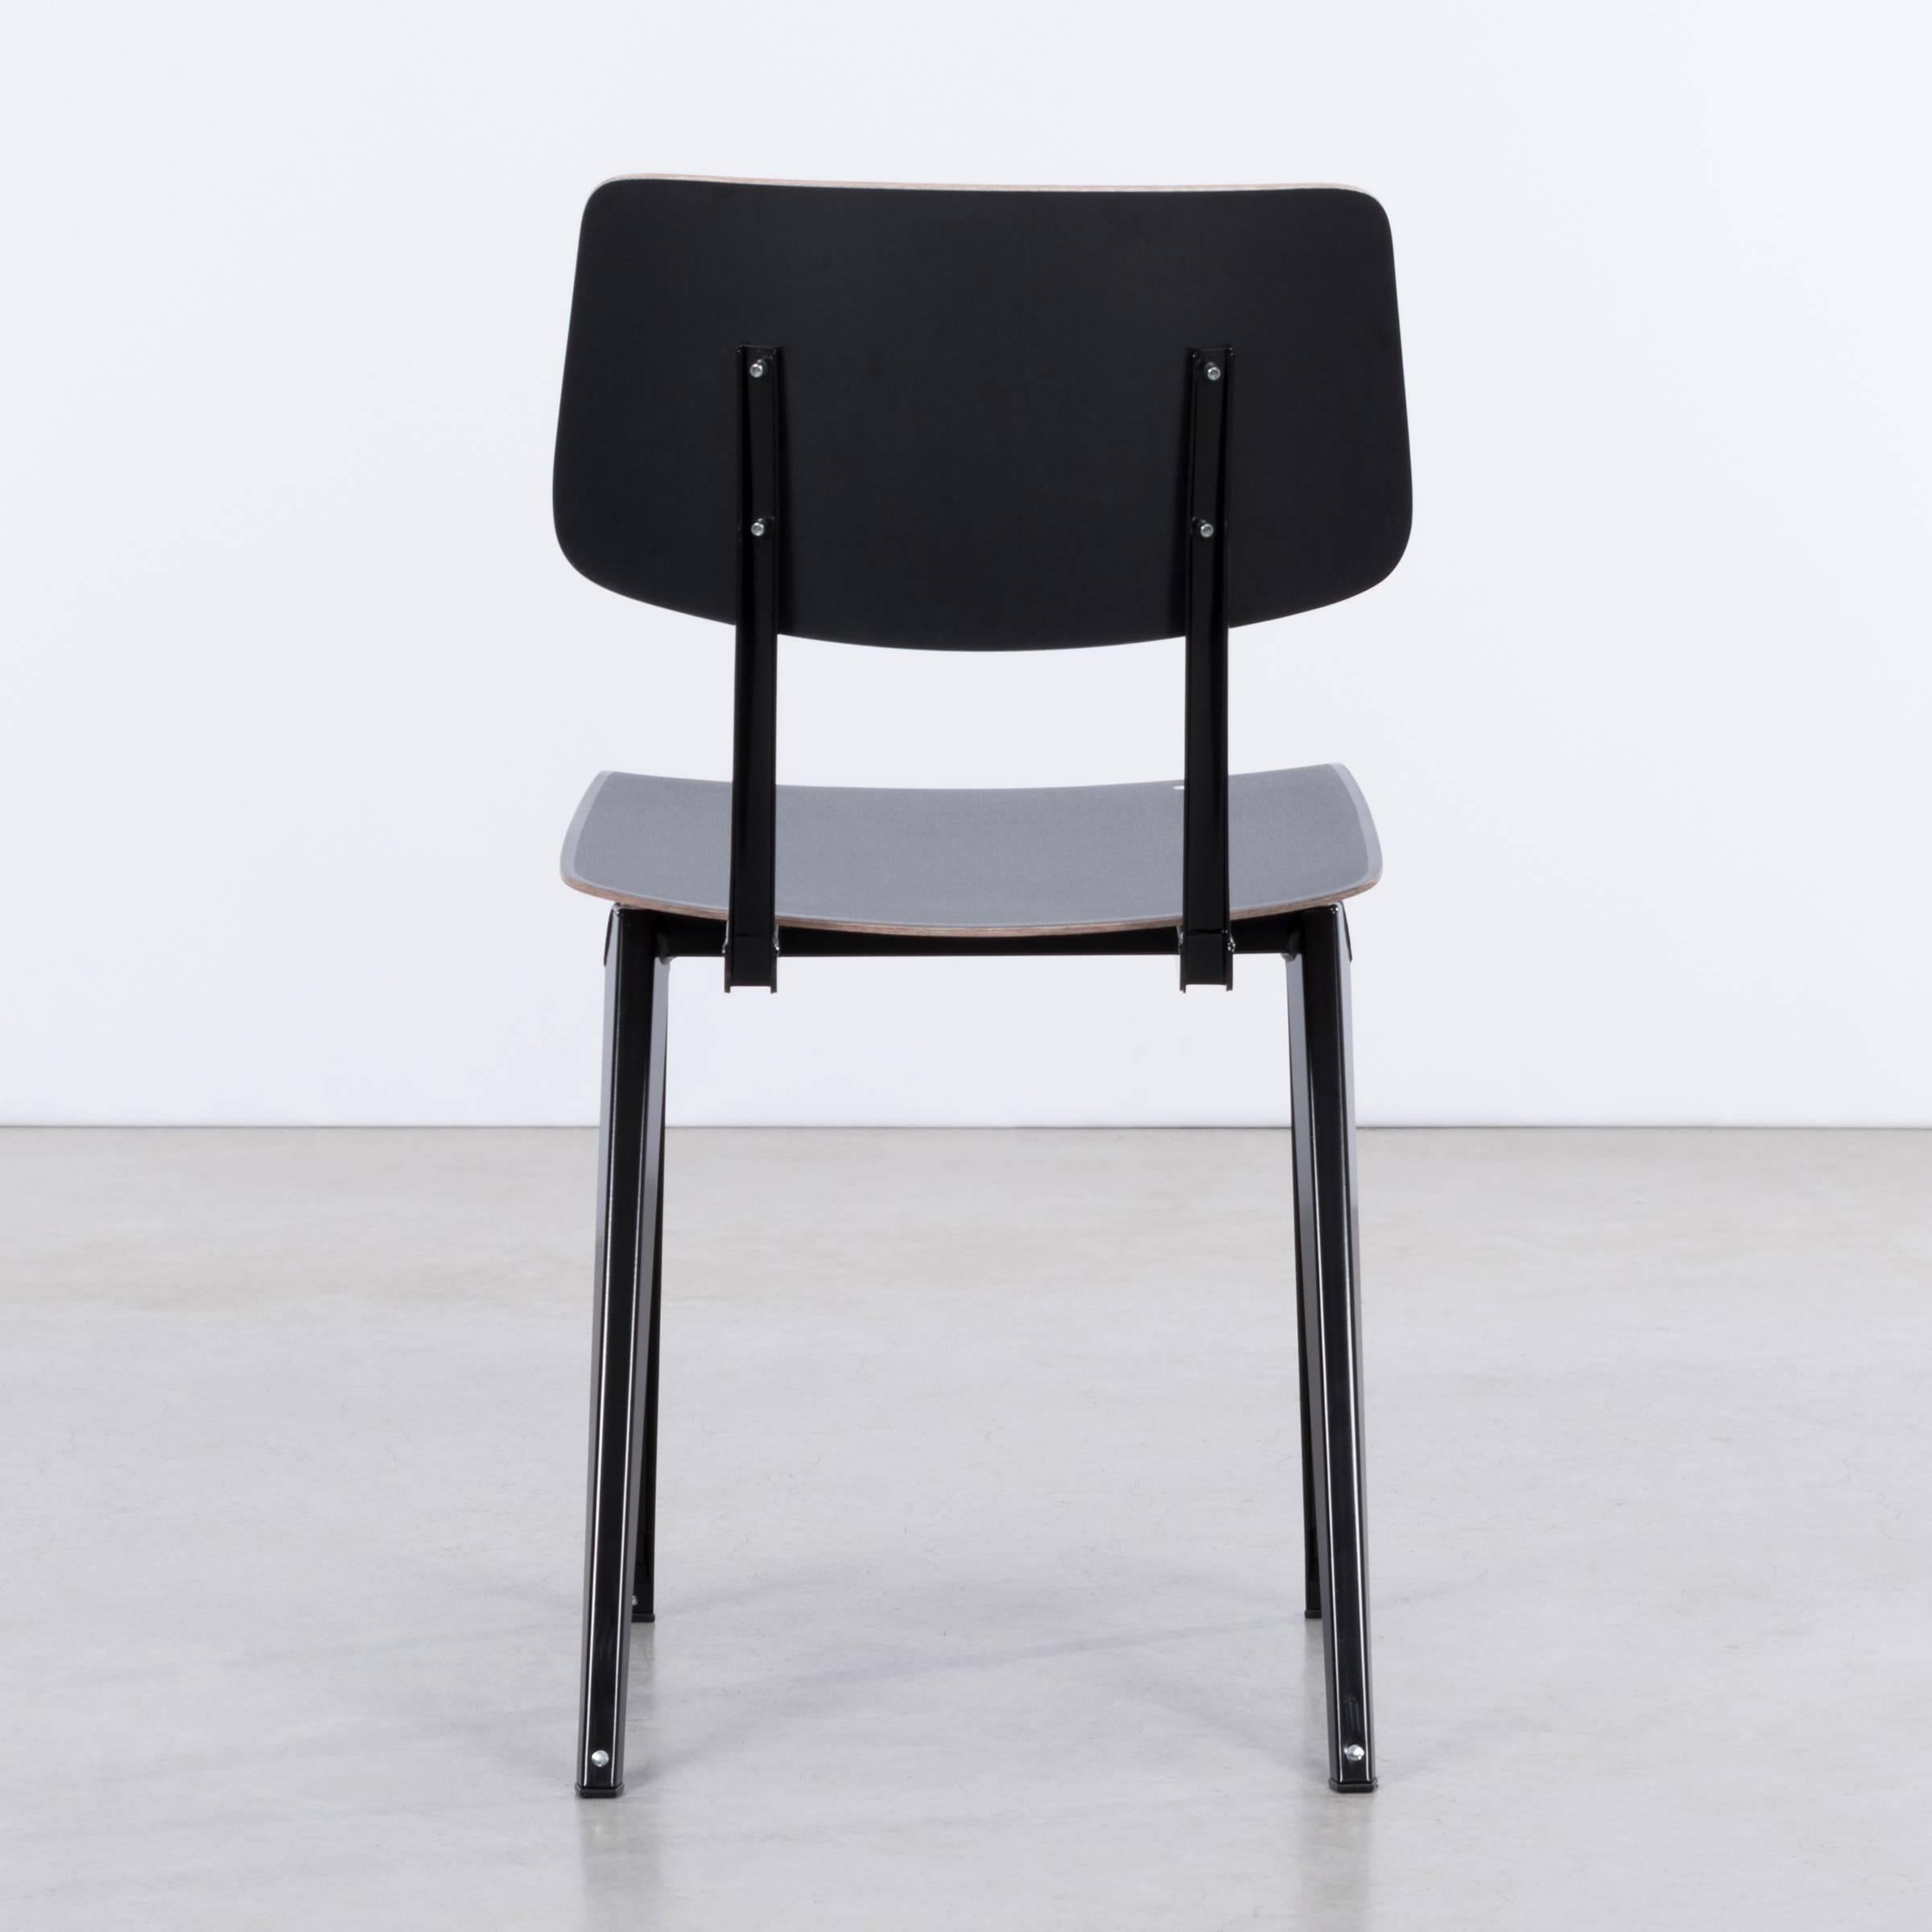 Dutch Multiple Industrial Galvanitas S16 Dining Chairs in Black, Netherlands For Sale